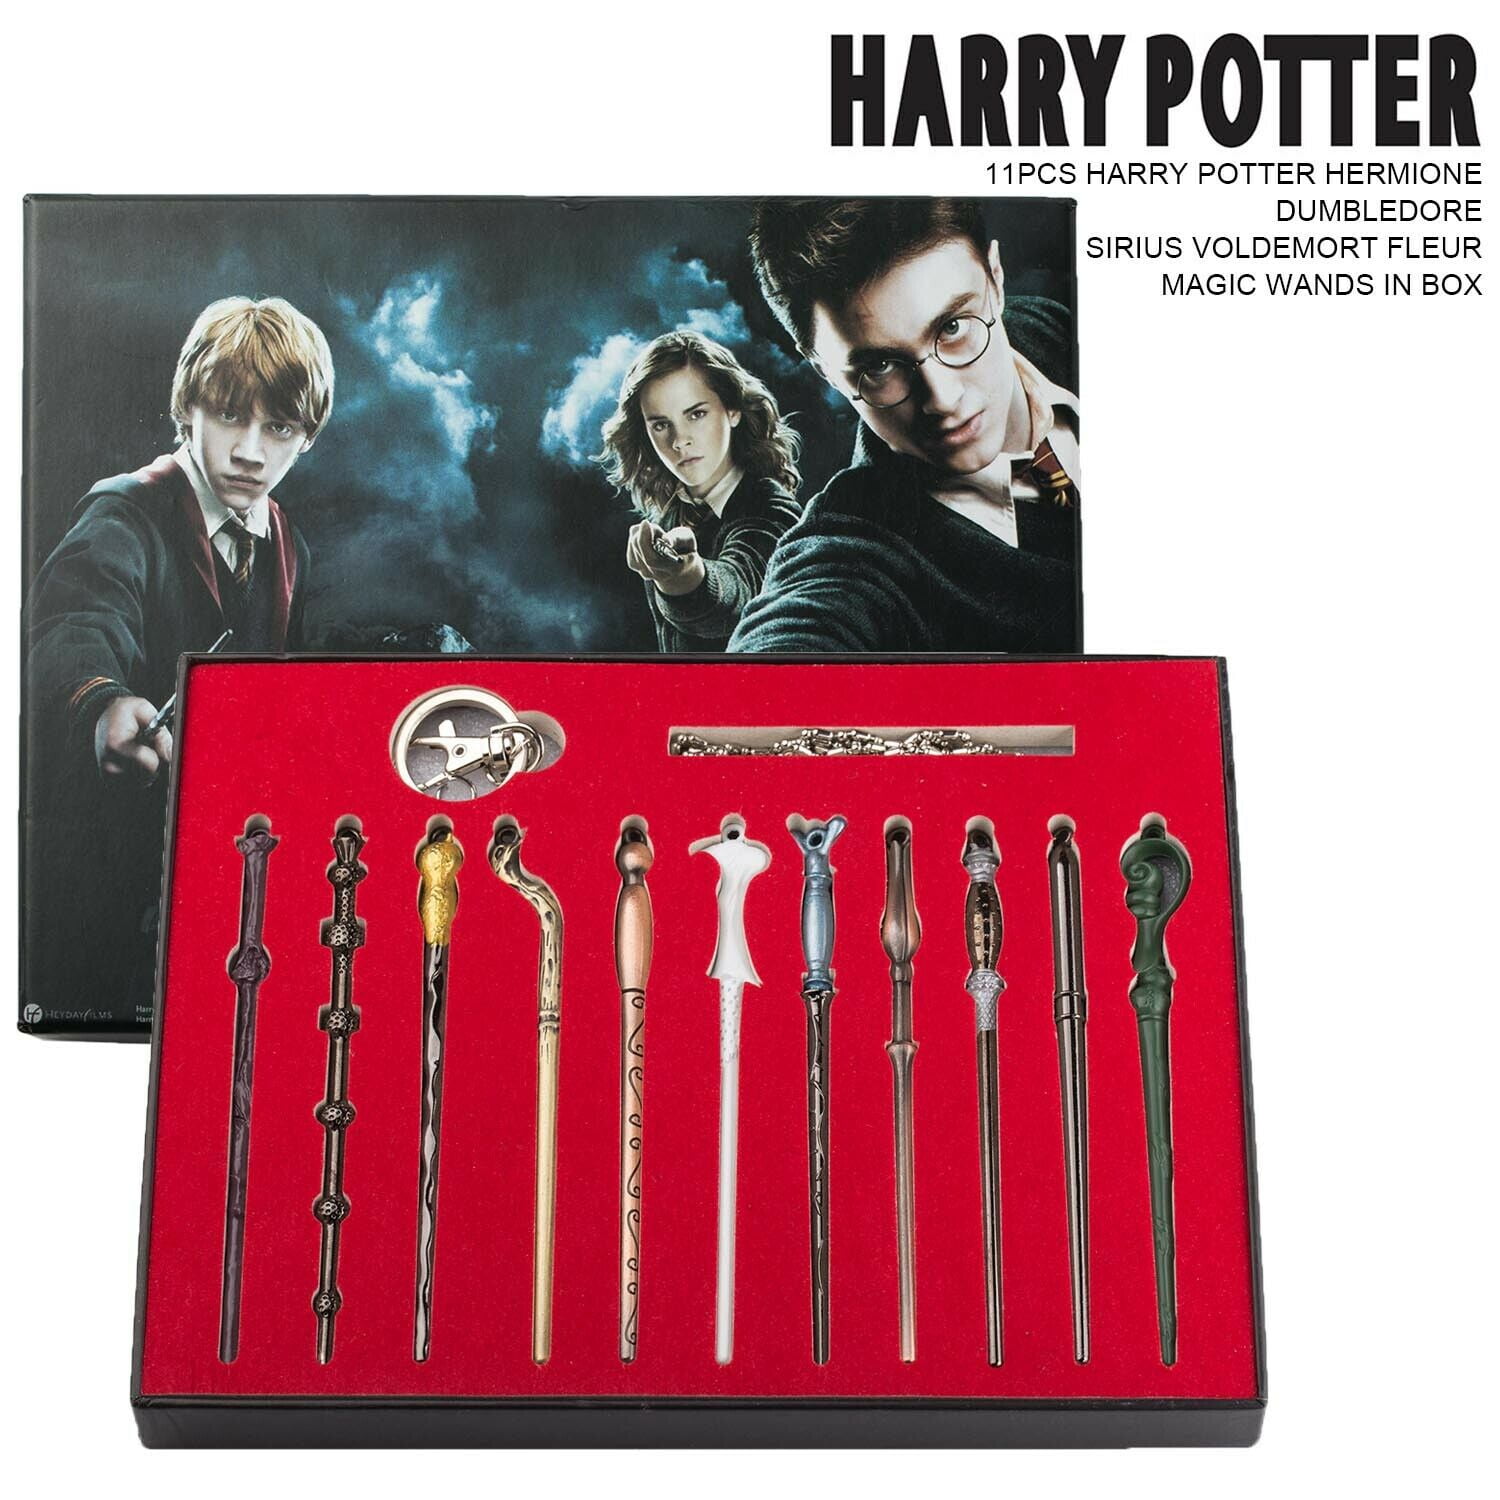  Kosmos 604653 Harry Potter AllesKönnerKiste Wand Making, Magic  Wands of Harry Potter, Dumbledore and Voldemort Crafts, Harry Potter Craft  Set for Children and Adults : Toys & Games